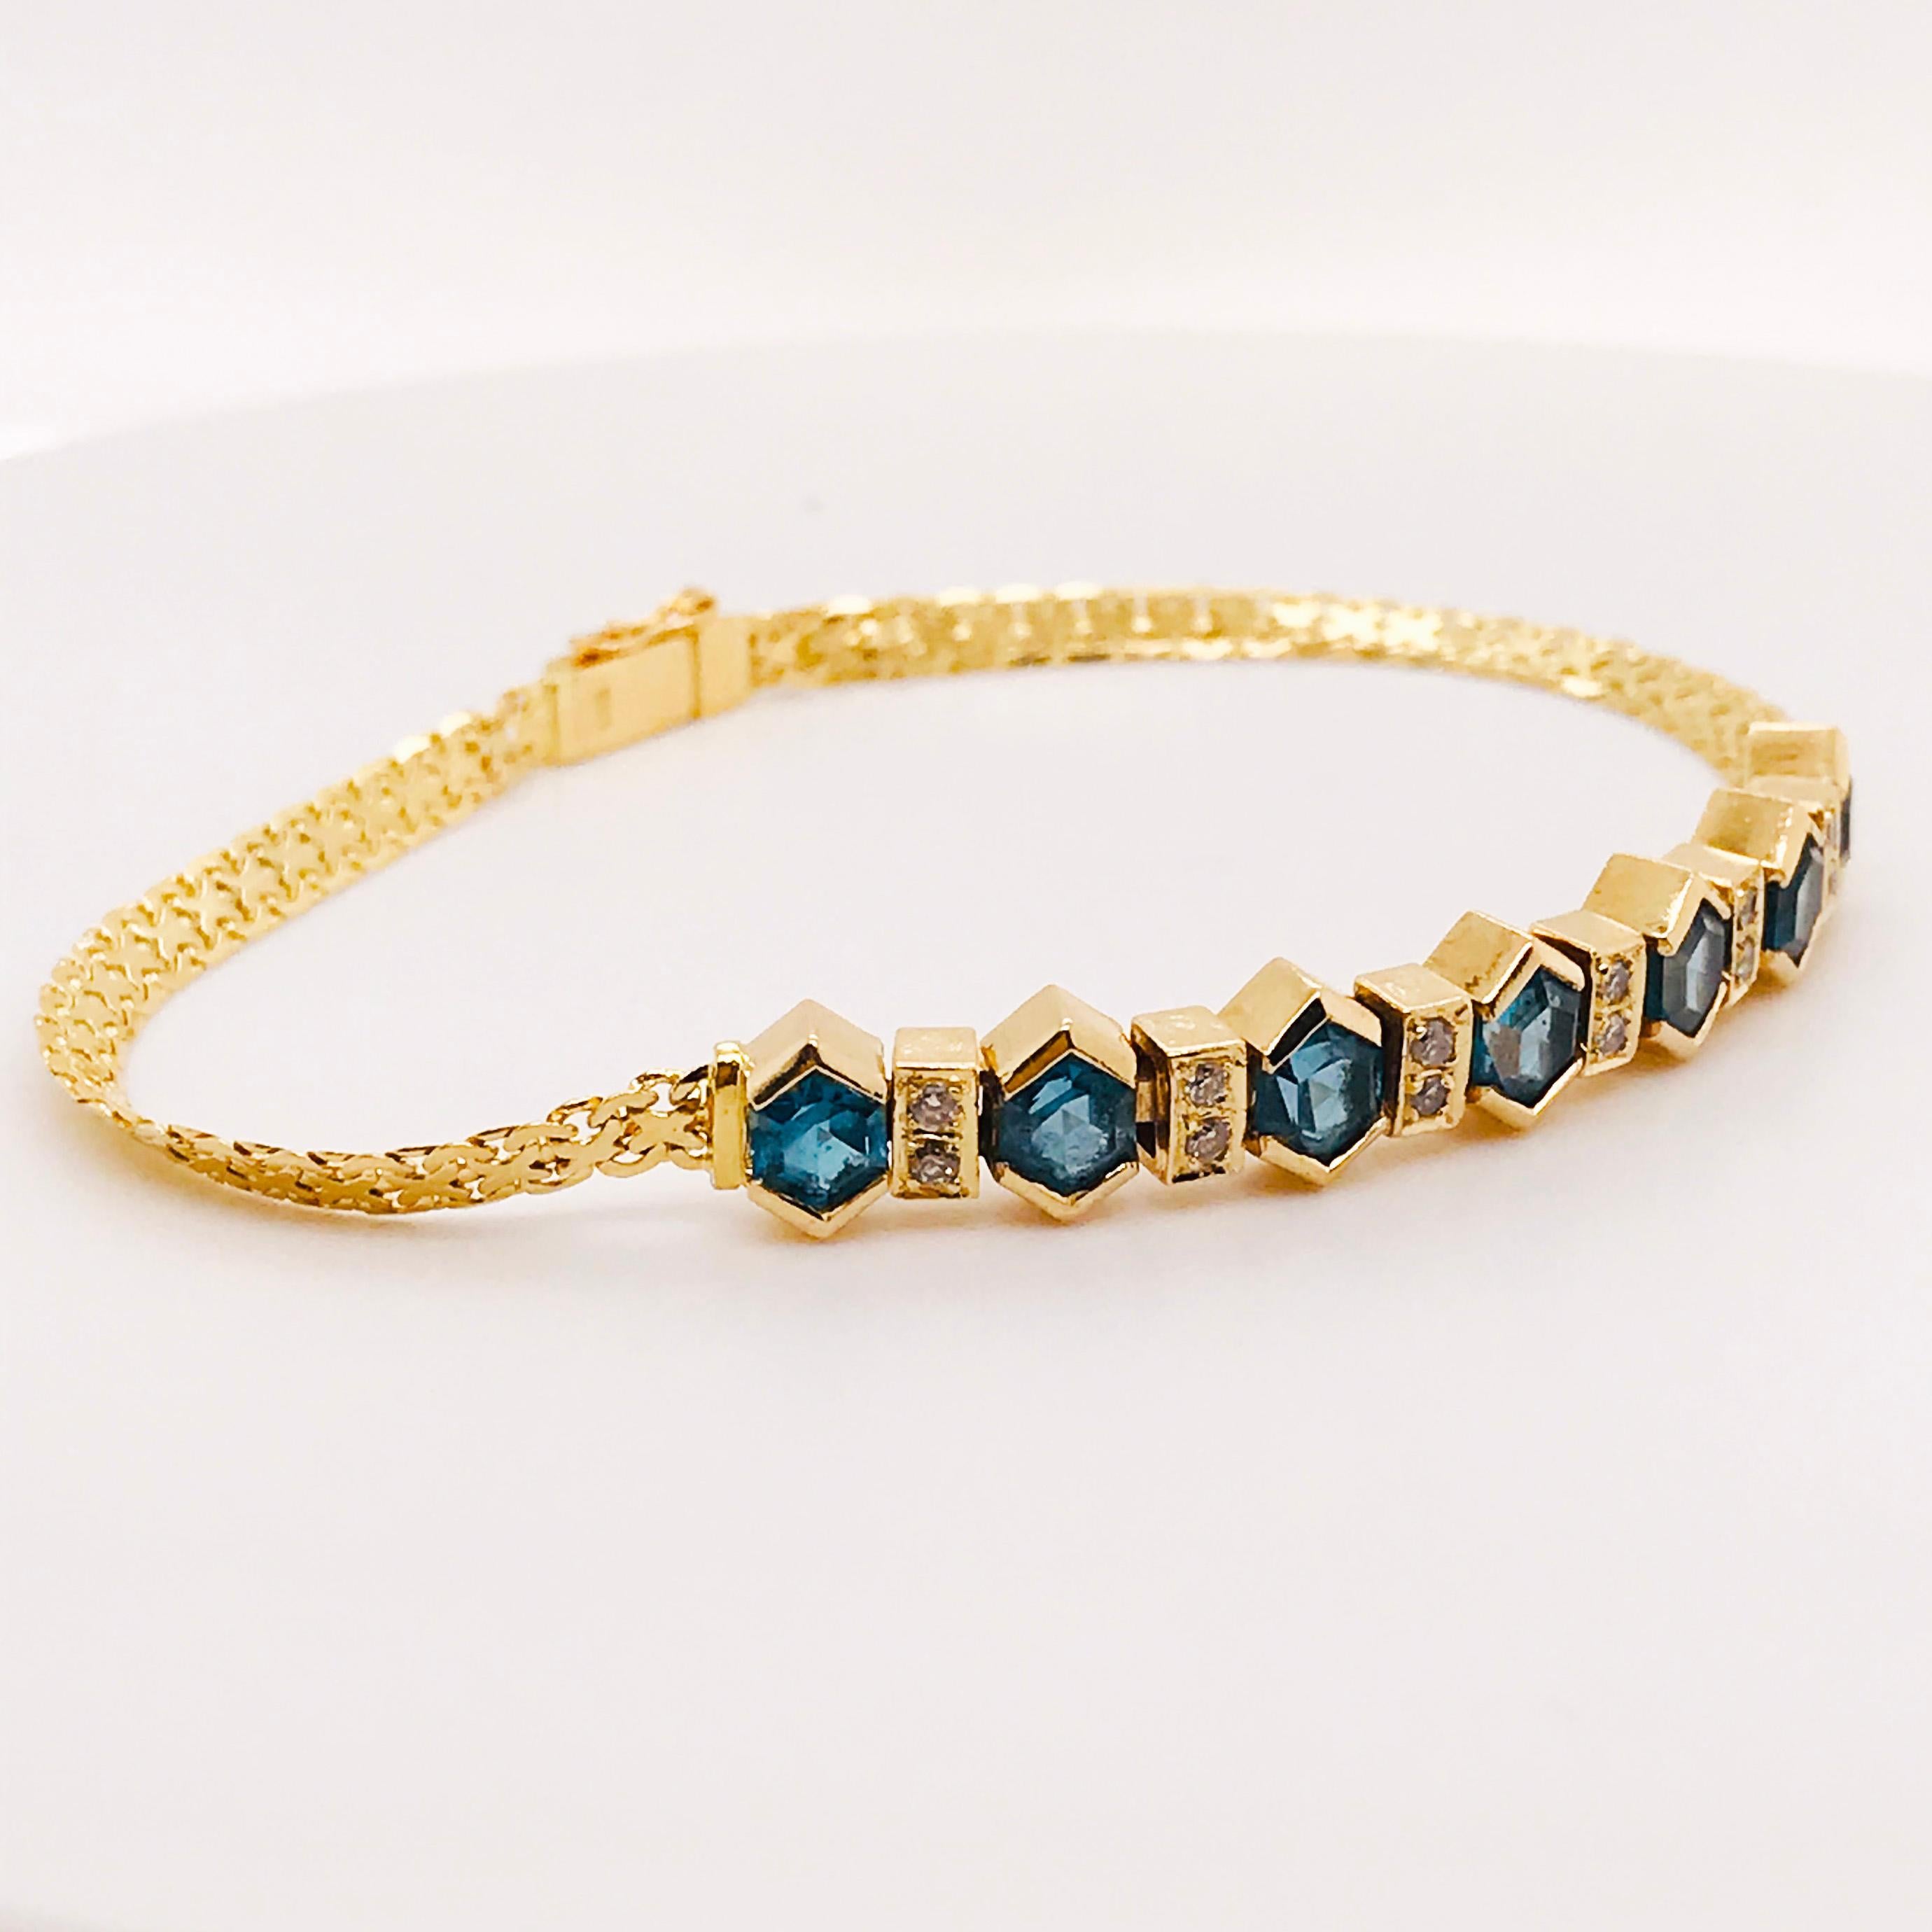 This is a one of a kind pice. Our deep blue and beautiful gemstone and diamond bracelet is unique, lovely and romantic. The deep blue natural color of the genuine tourmaline gemstones would look great on a blue eyed beauty. The blue is vibrant and